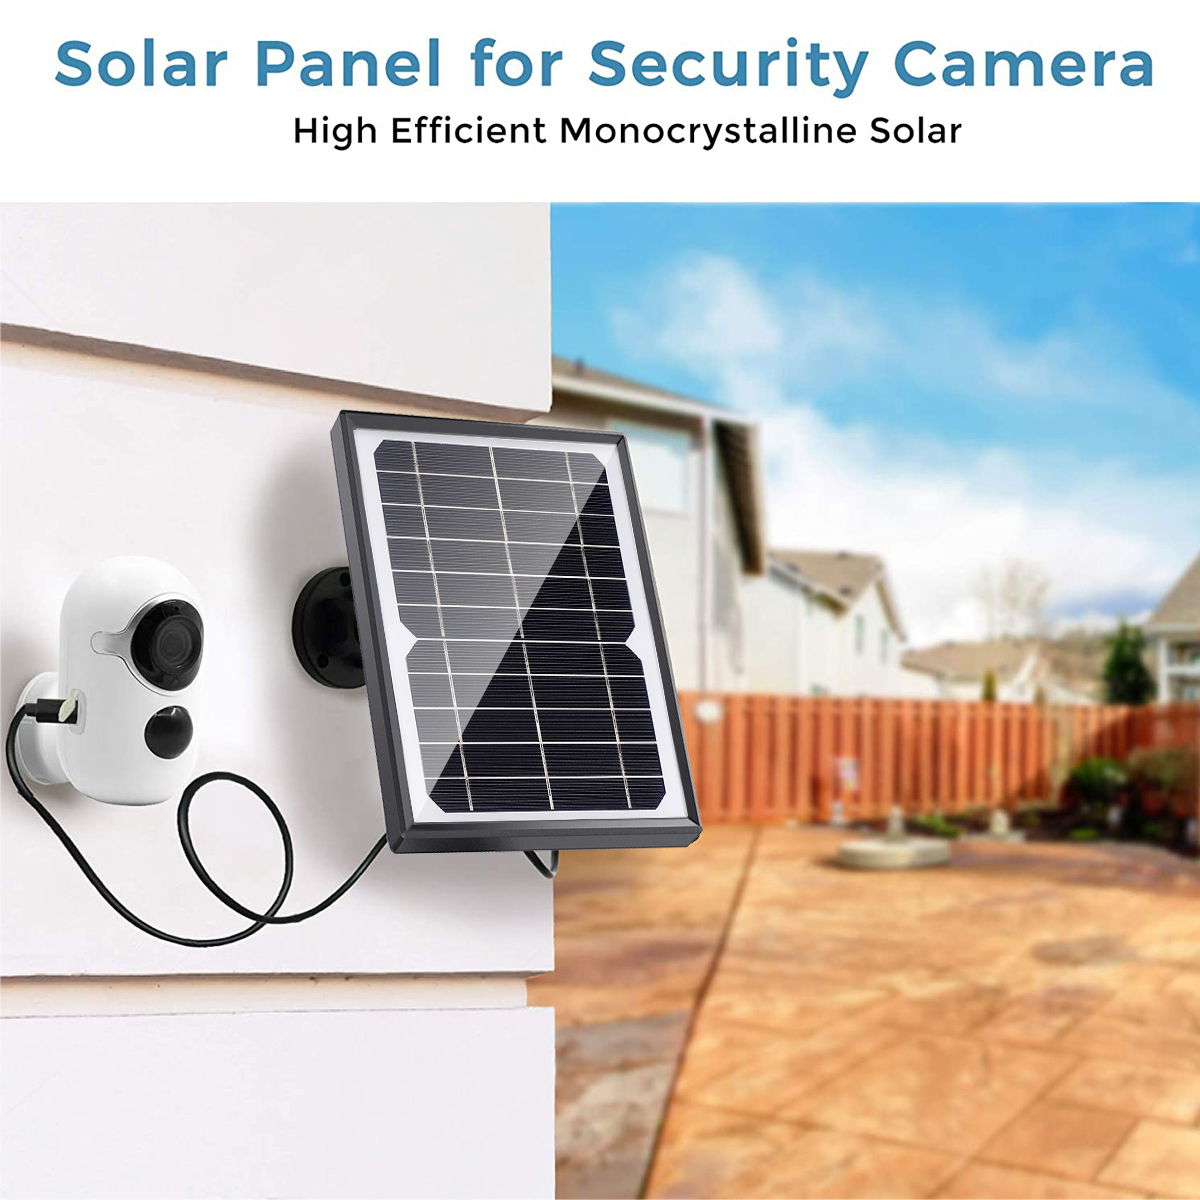 6V-8W-Portable-Solar-Panel-Solar-Charging-Panel-for-Outdoor-Camera-Security-Monitoring-Courtyard-Lig-1924657-2